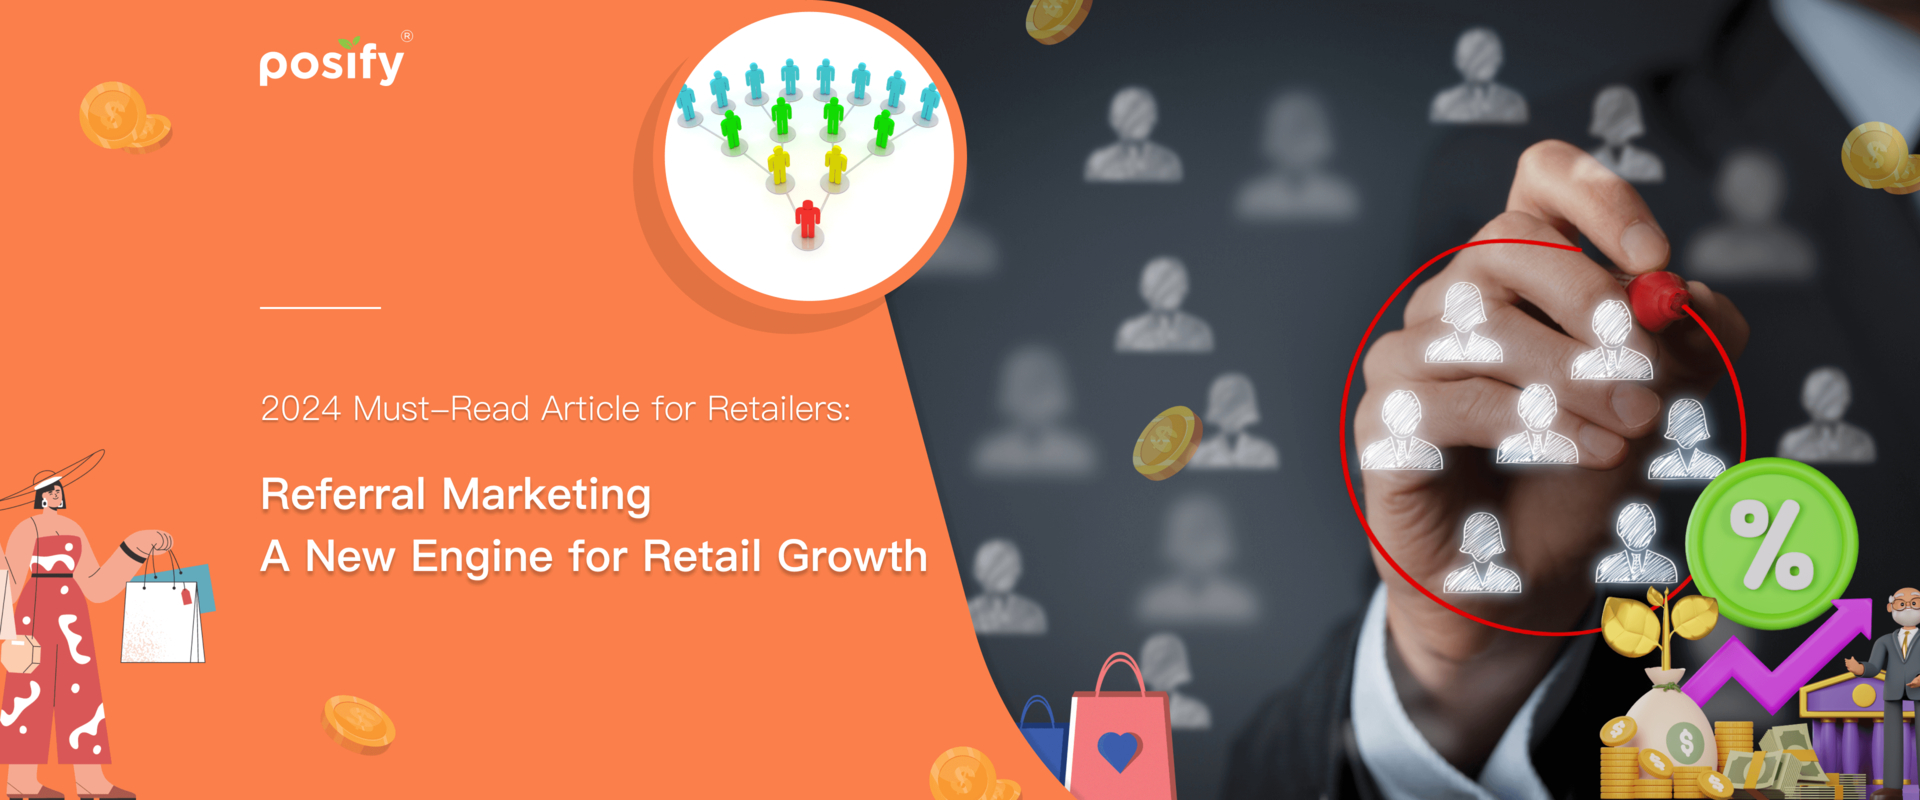 2024 Essential Reading for Retailers: Referral Marketing - A New Engine for Retail Growth